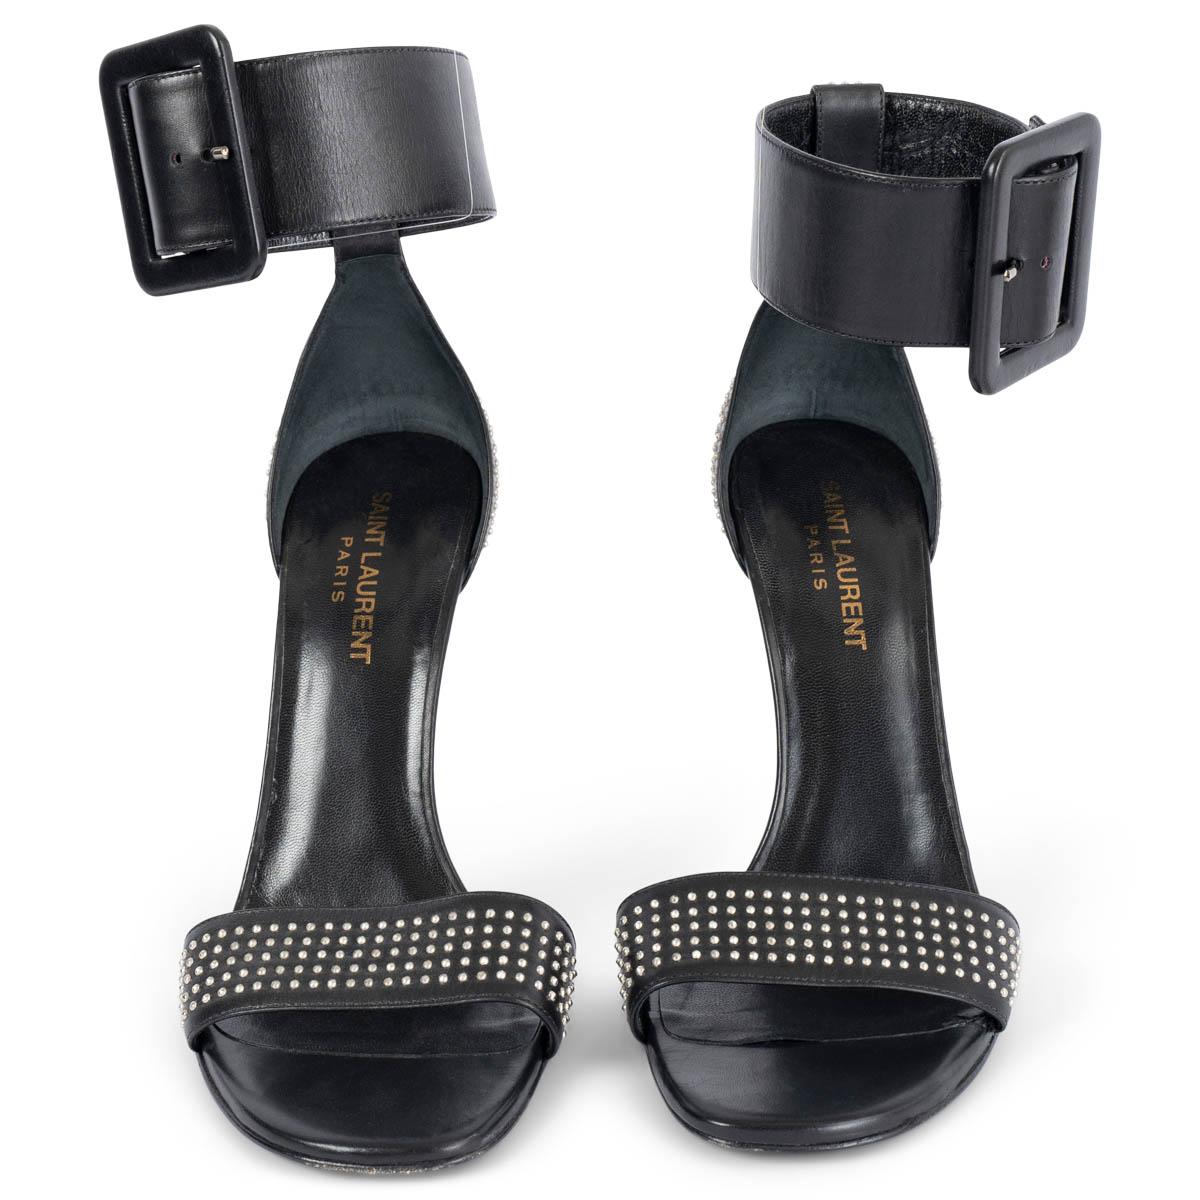 100% authentic Saint Laurent Jane 106 sandals in black calfskin with silver studded design throughout and a chunky ankle strap with adjustable buckle closure. Open toe and stiletto heels. Have been worn once or twice and are in excellent condition.